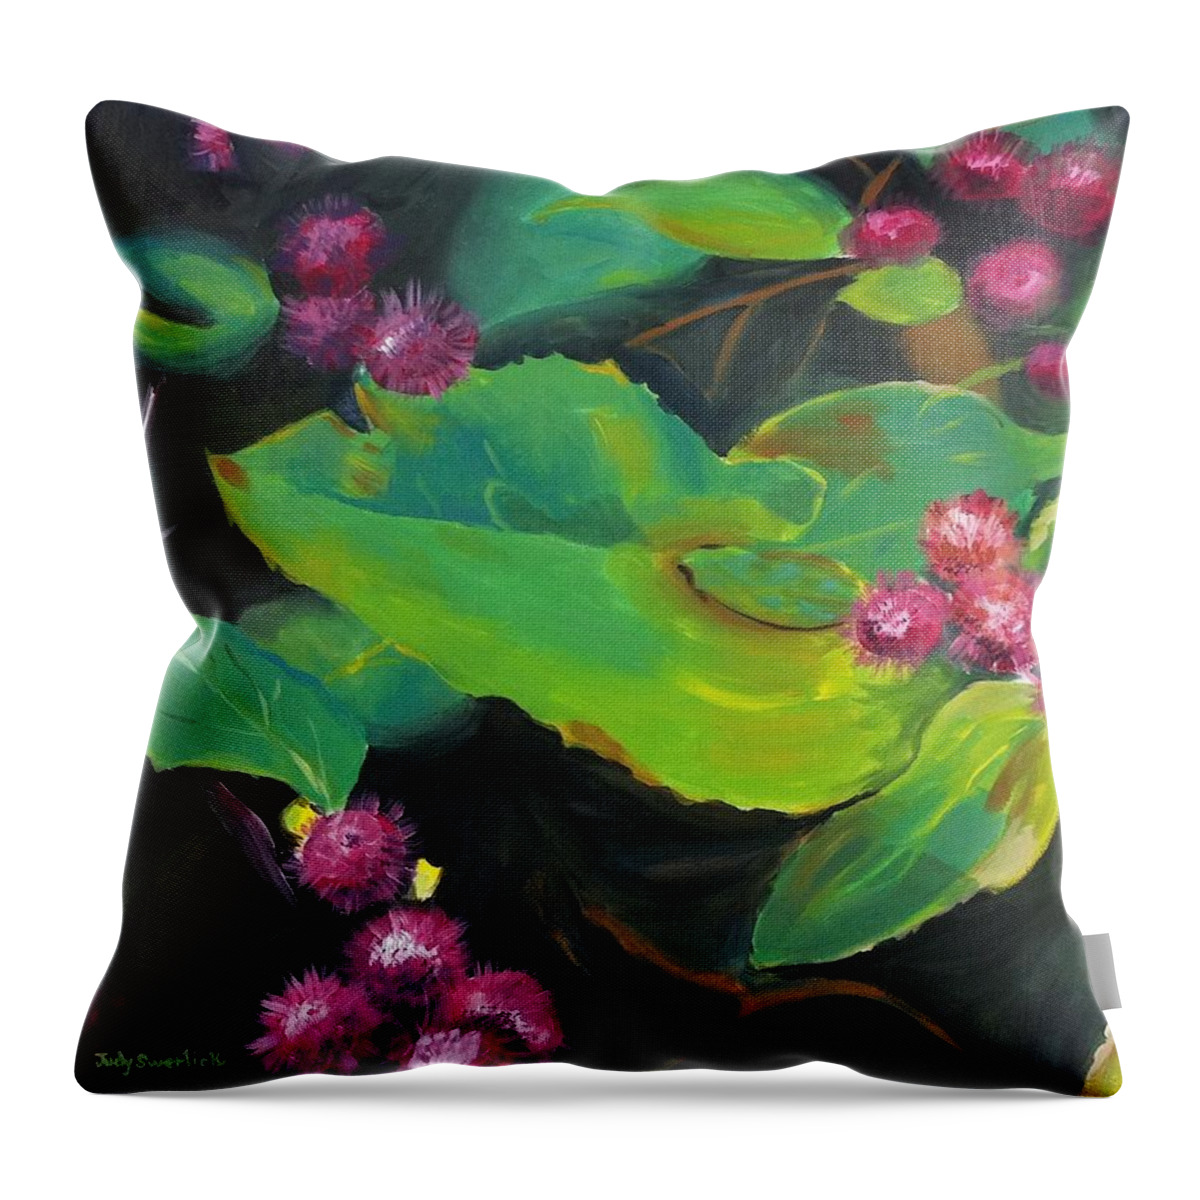 Flowers Throw Pillow featuring the painting Spiked Flowers by Judy Swerlick